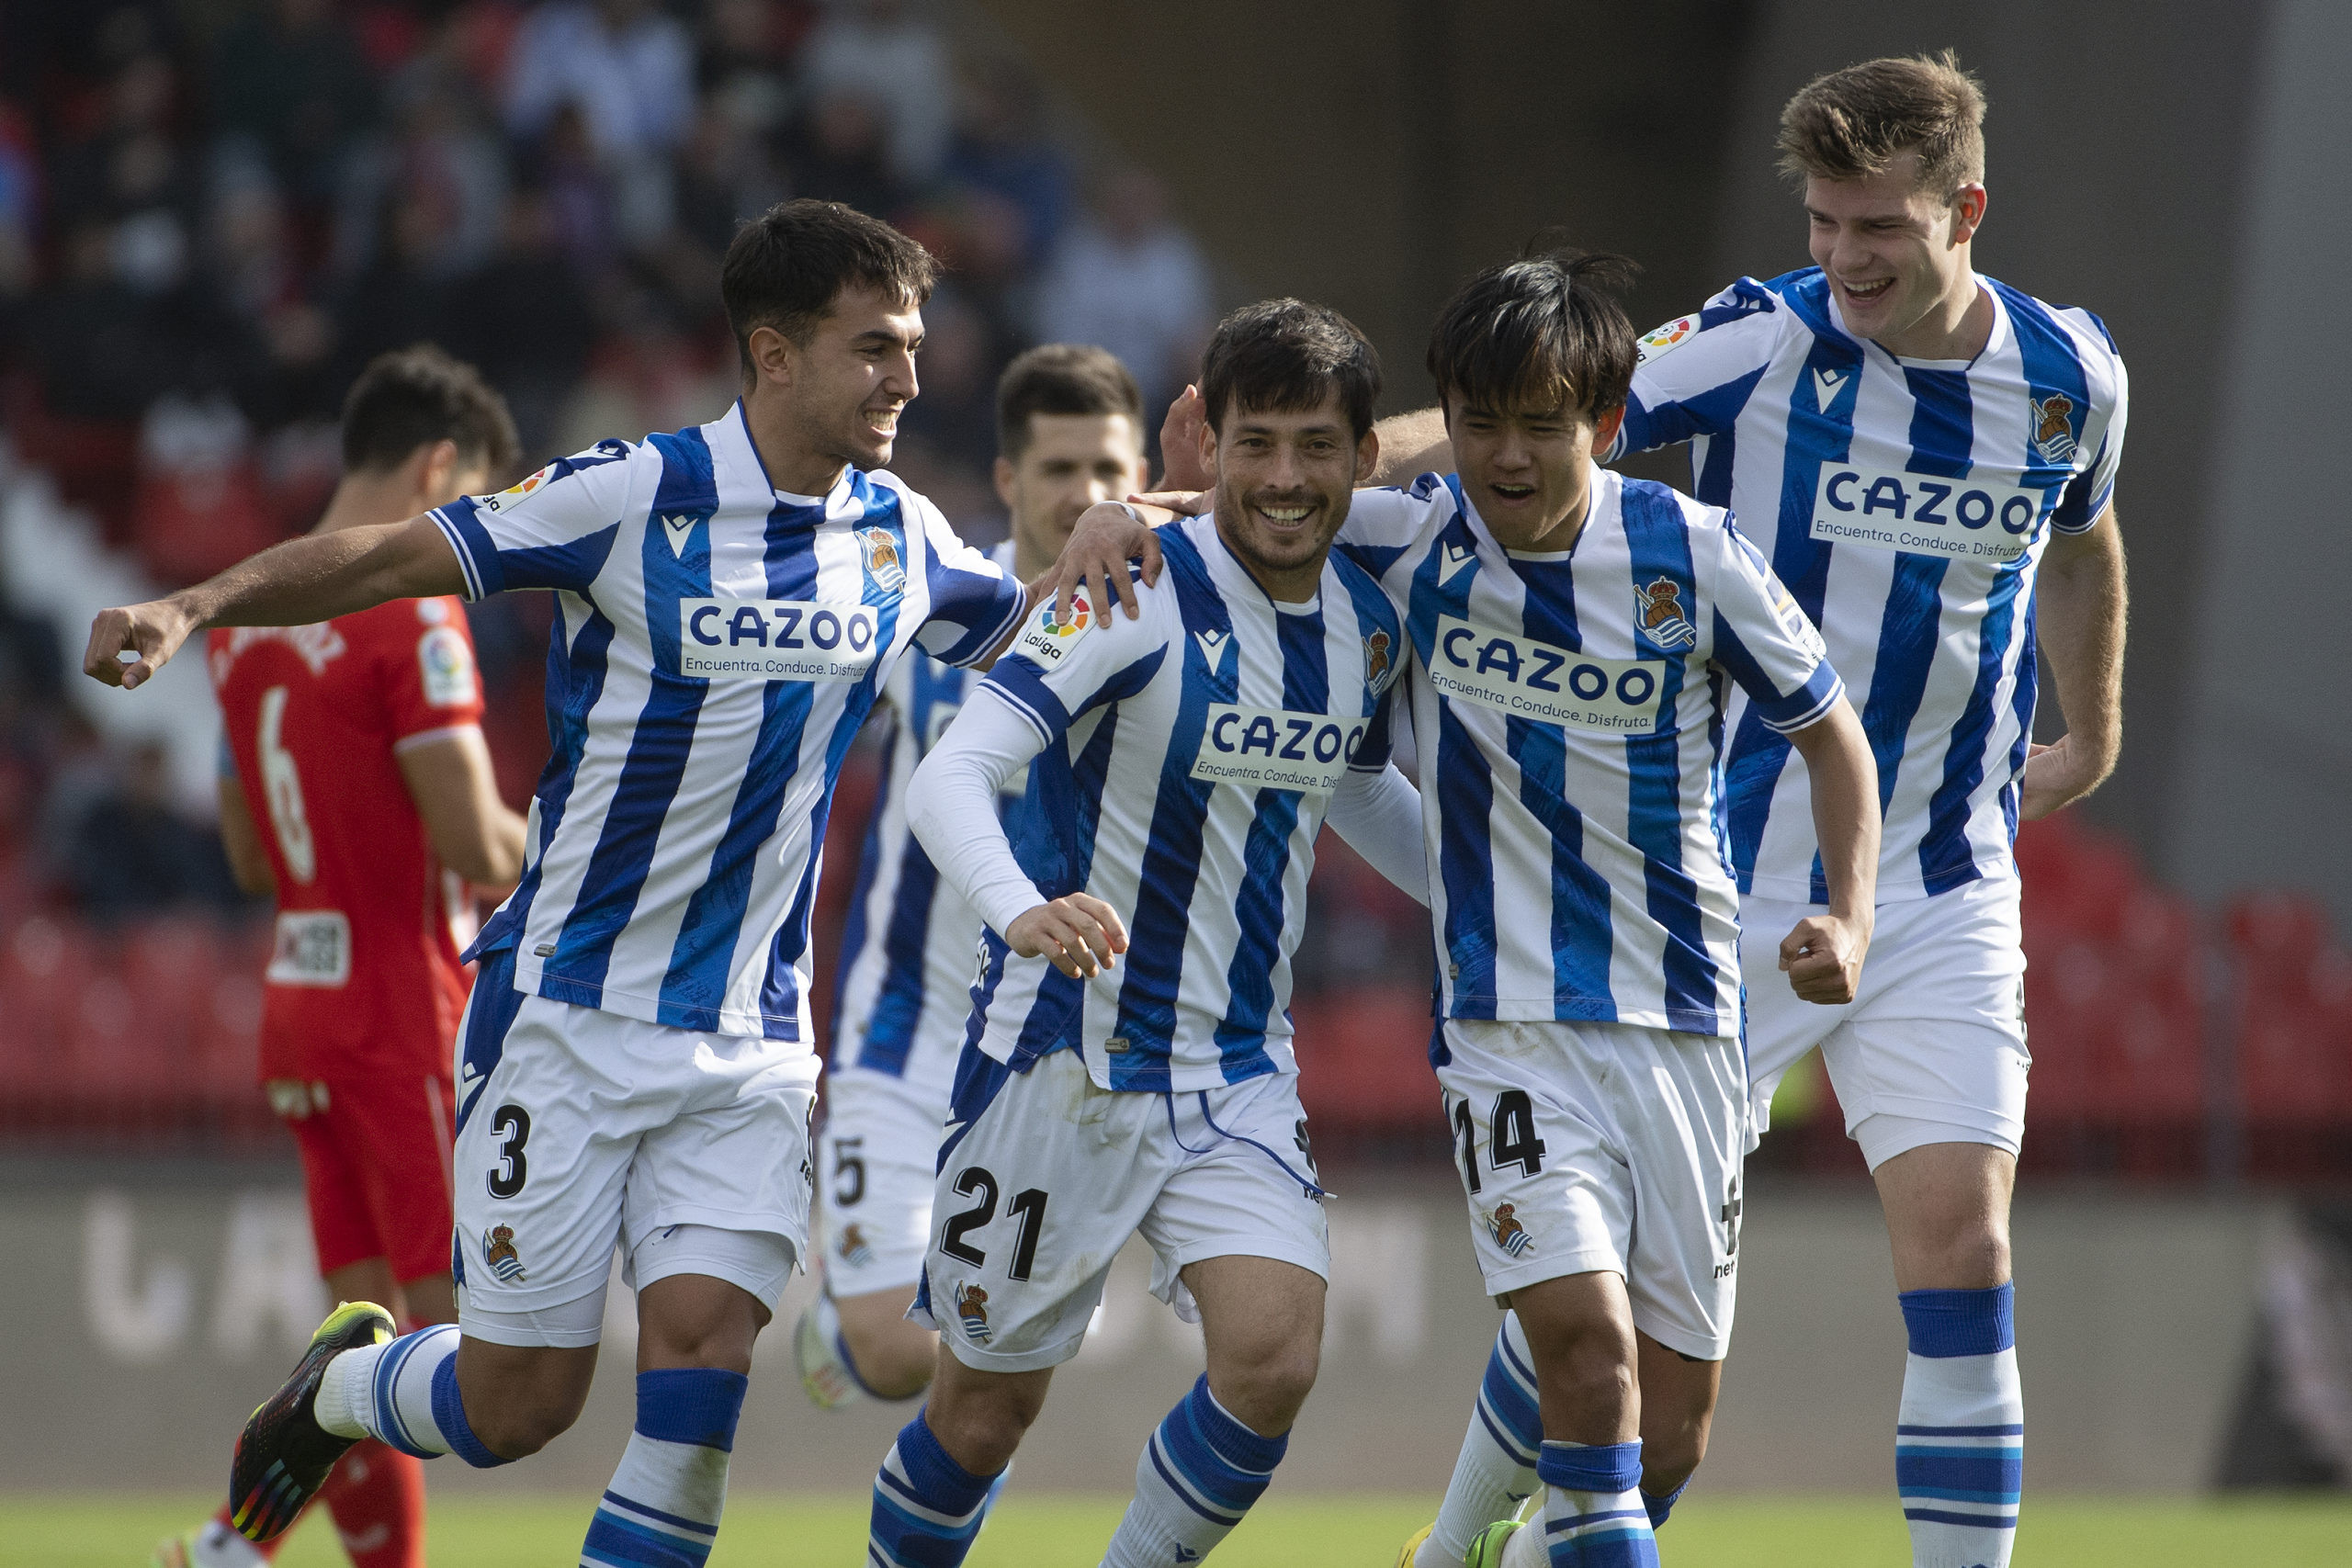 Real Sociedad aiming for Champions League return